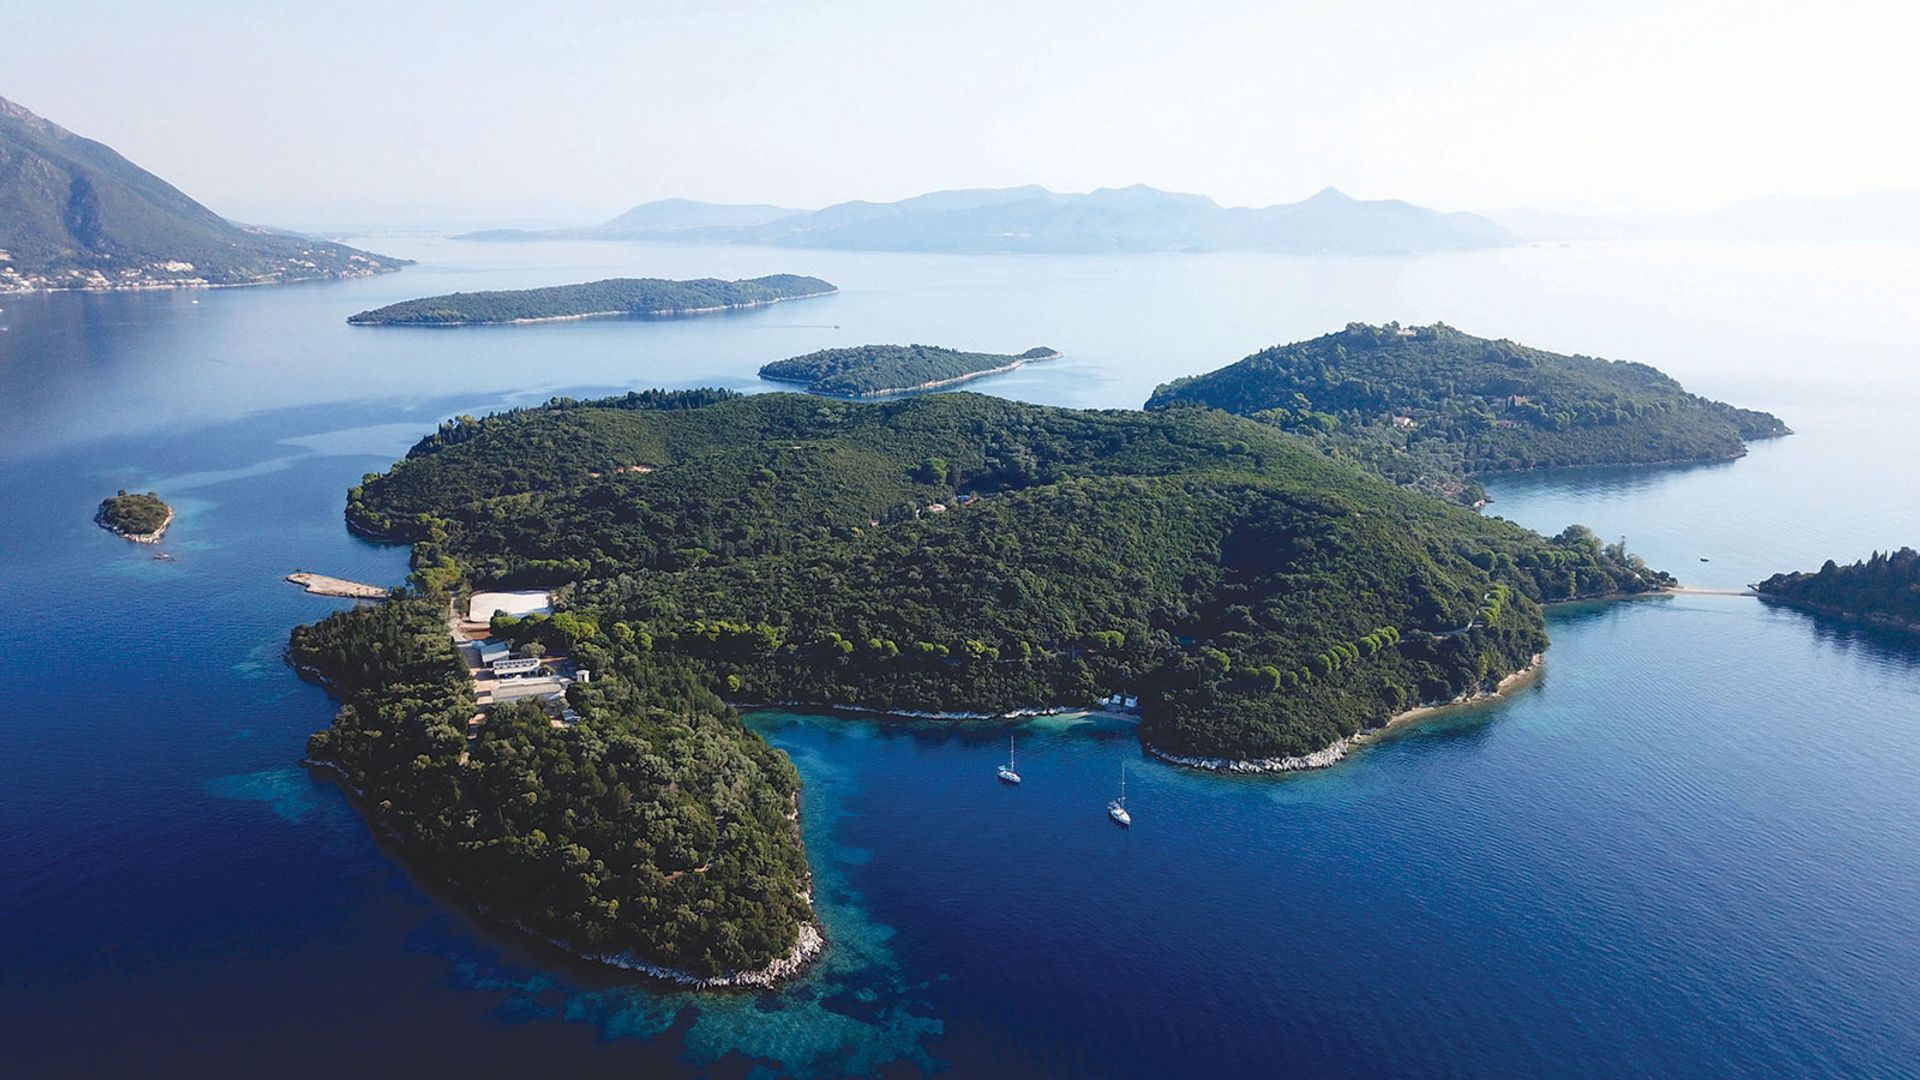 Skorpios island, bought by Dmitry Rybolovlev from Aristotle Onassis’s last remaining descendant, could become an art hideaway Adobe Stock